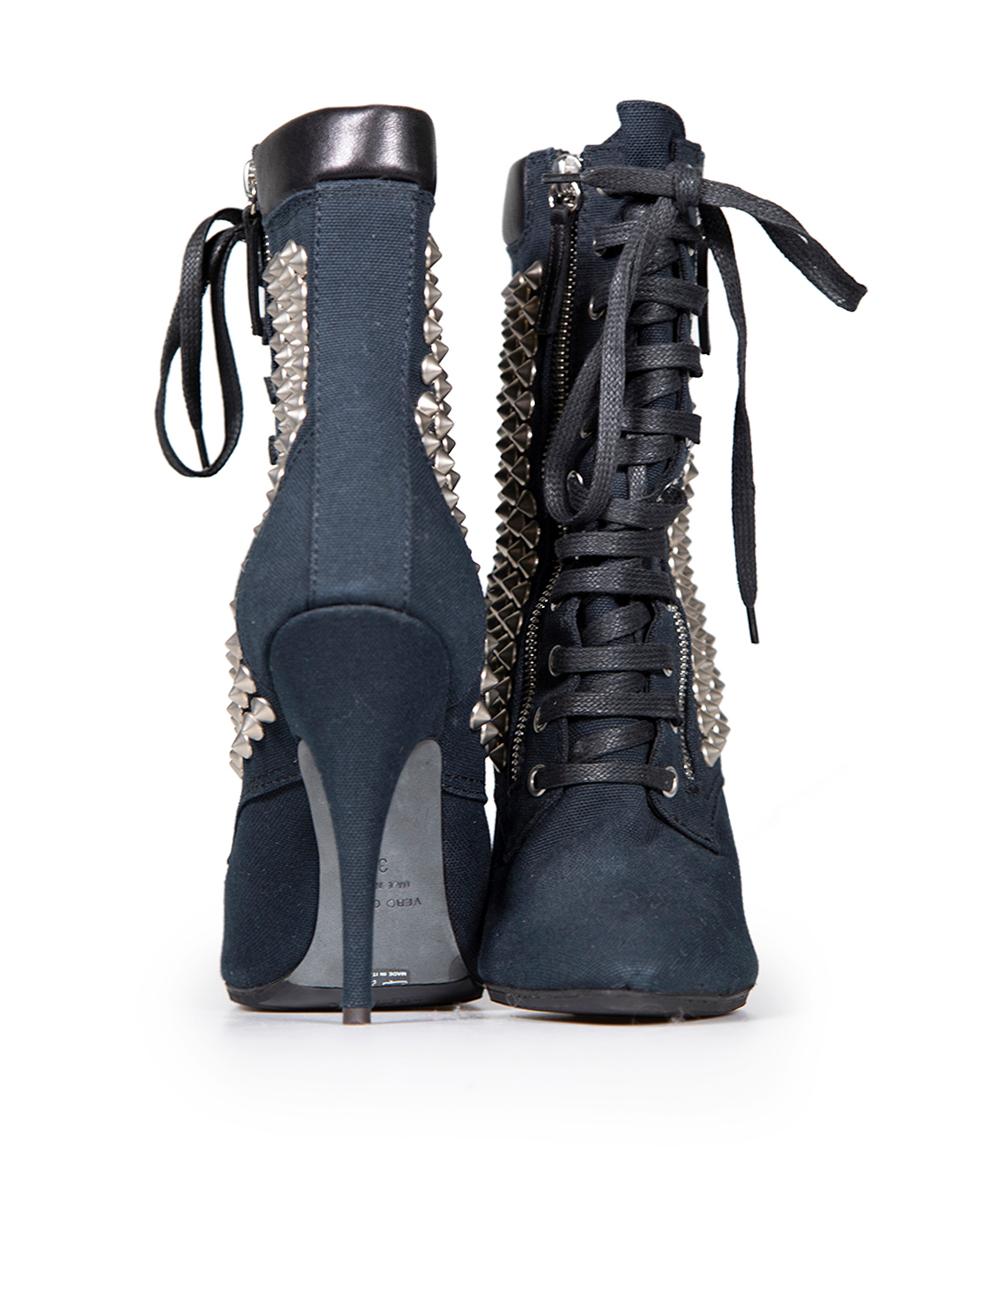 Giuseppe Zanotti x Balmain Navy Studded Zip Lace-Up Boots Size IT 39 In Good Condition For Sale In London, GB